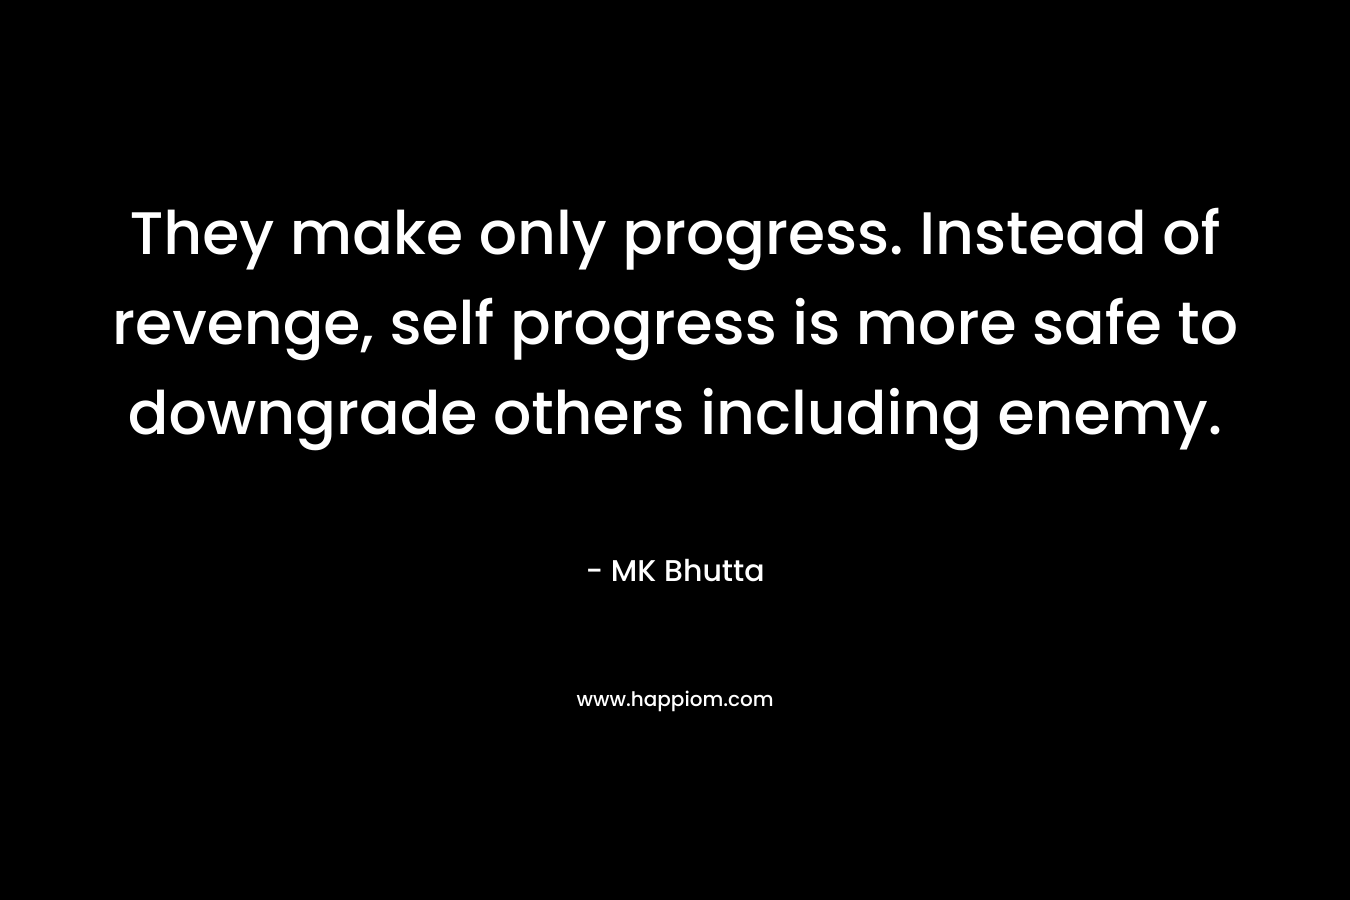 They make only progress. Instead of revenge, self progress is more safe to downgrade others including enemy. – MK Bhutta